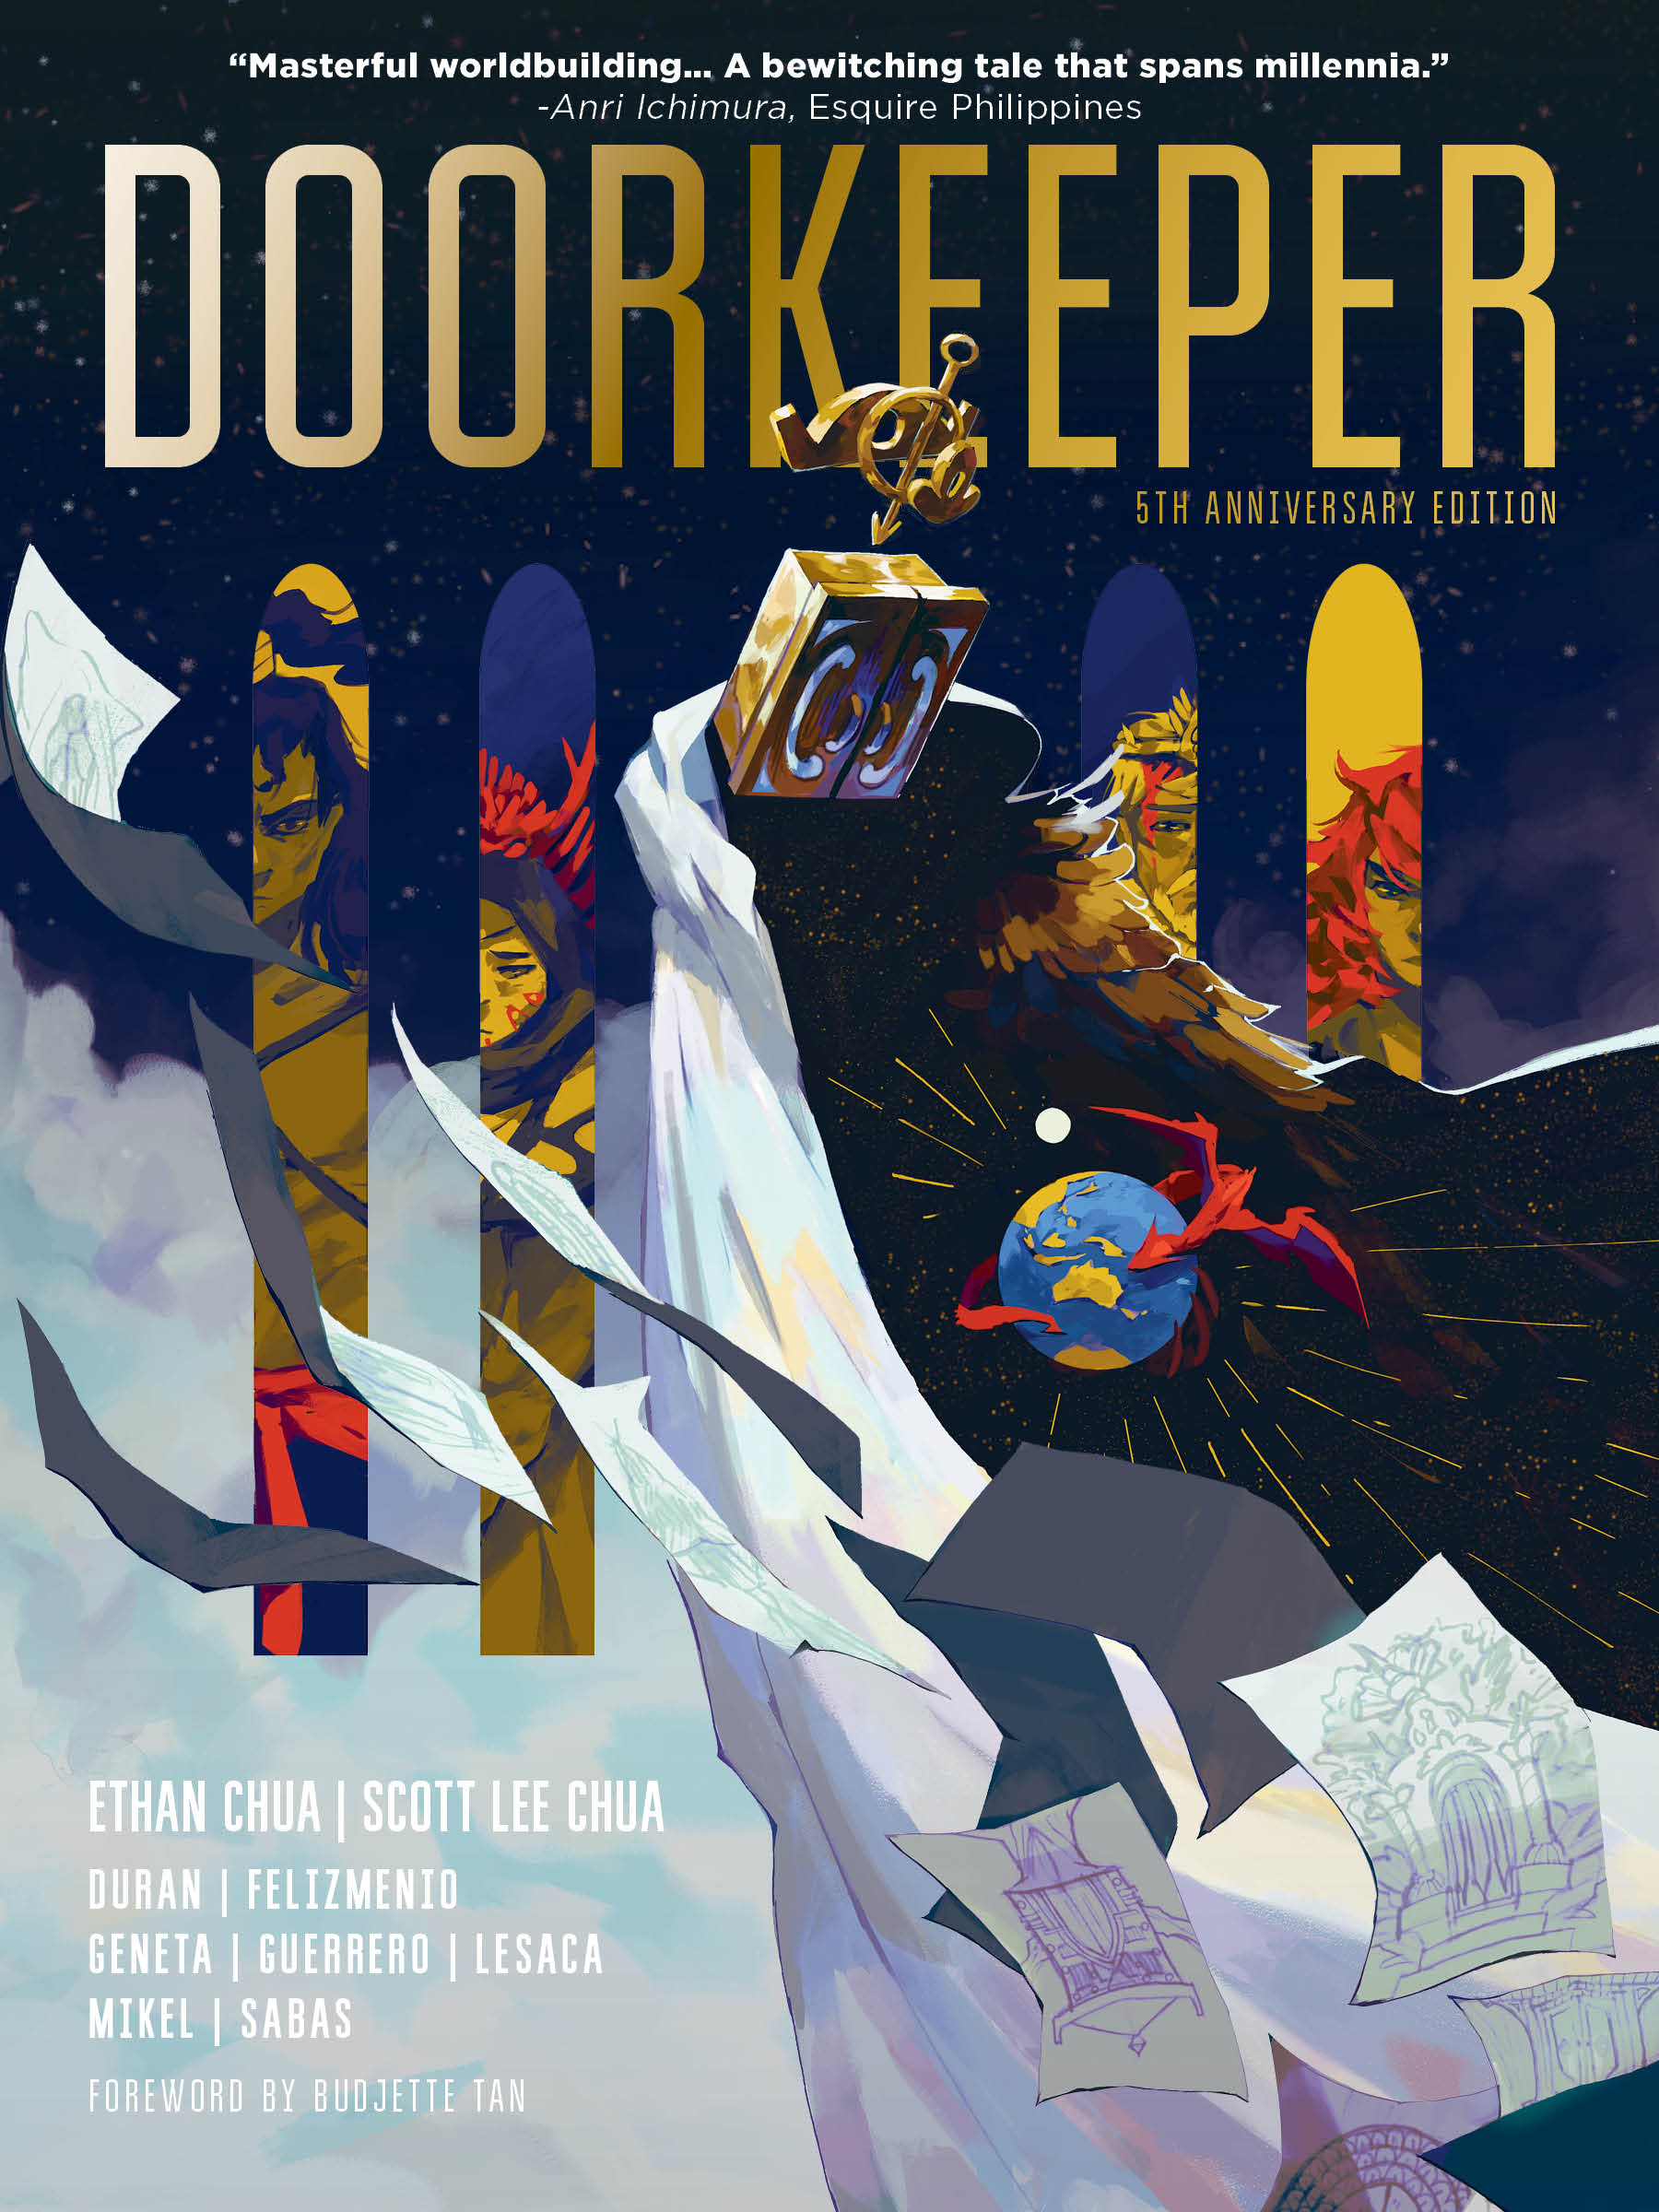 Cover page of Doorkeeper fifth anniversary edition written by Ethan Chua and Scott Lee Chua. Above the title is a review quote Masterful wordbuilding, a bewitching tale that spans millennia end quote by Anri Ichimura, Esquire Philippines. Surnames of artists from left to right. Duran, Felizmenio, Geneta, Guerrero, Lesaca, Mikel, Sabas. Next line. Foreword by Budjette Tan. The cover is a painting of a robed entity with a door for a head. Inside its robe is dark space, the earth, and a red dragon circling the earth. Behind the entity are four windows with characters peeking through them. From left to right. Muscular man. Old woman. Man with bloody forehead. Orange haired girl. In front of the entity, sketch papers fly across the page.